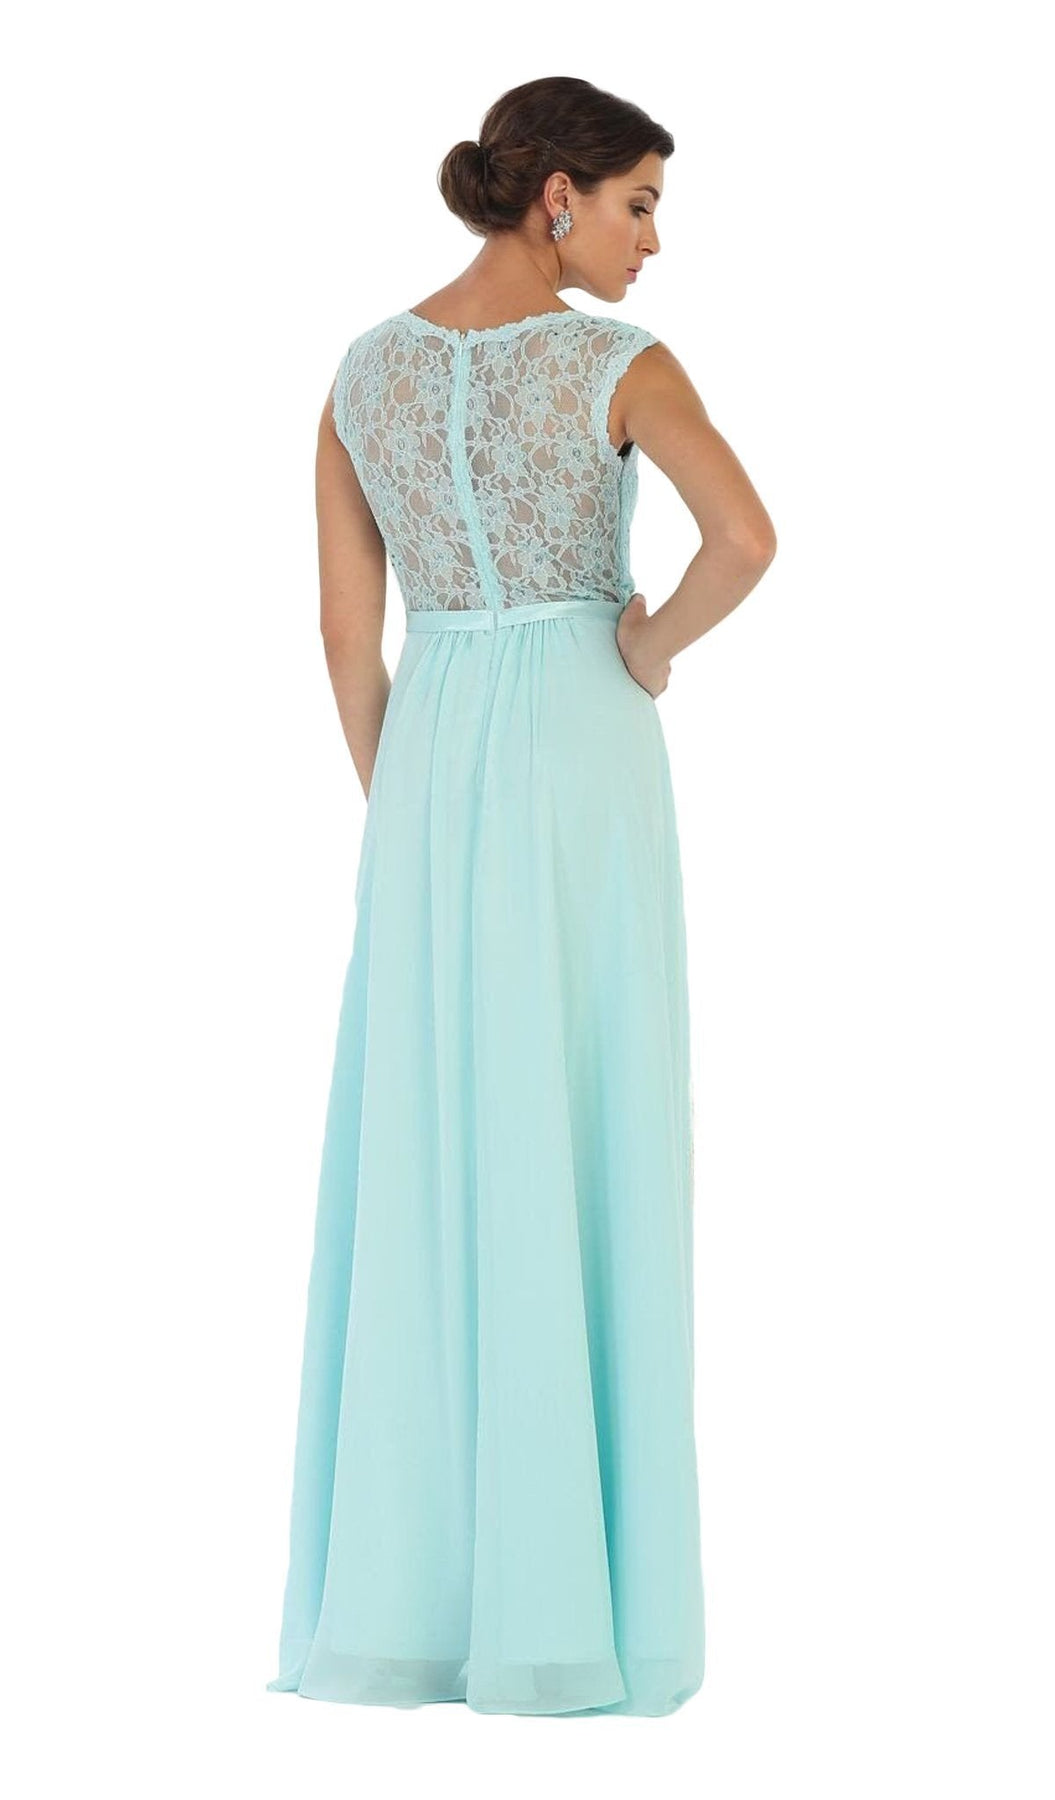 May Queen - Stunning Embellished Sweetheart Neck Chiffon A-Line Evening Dress Special Occasion Dress